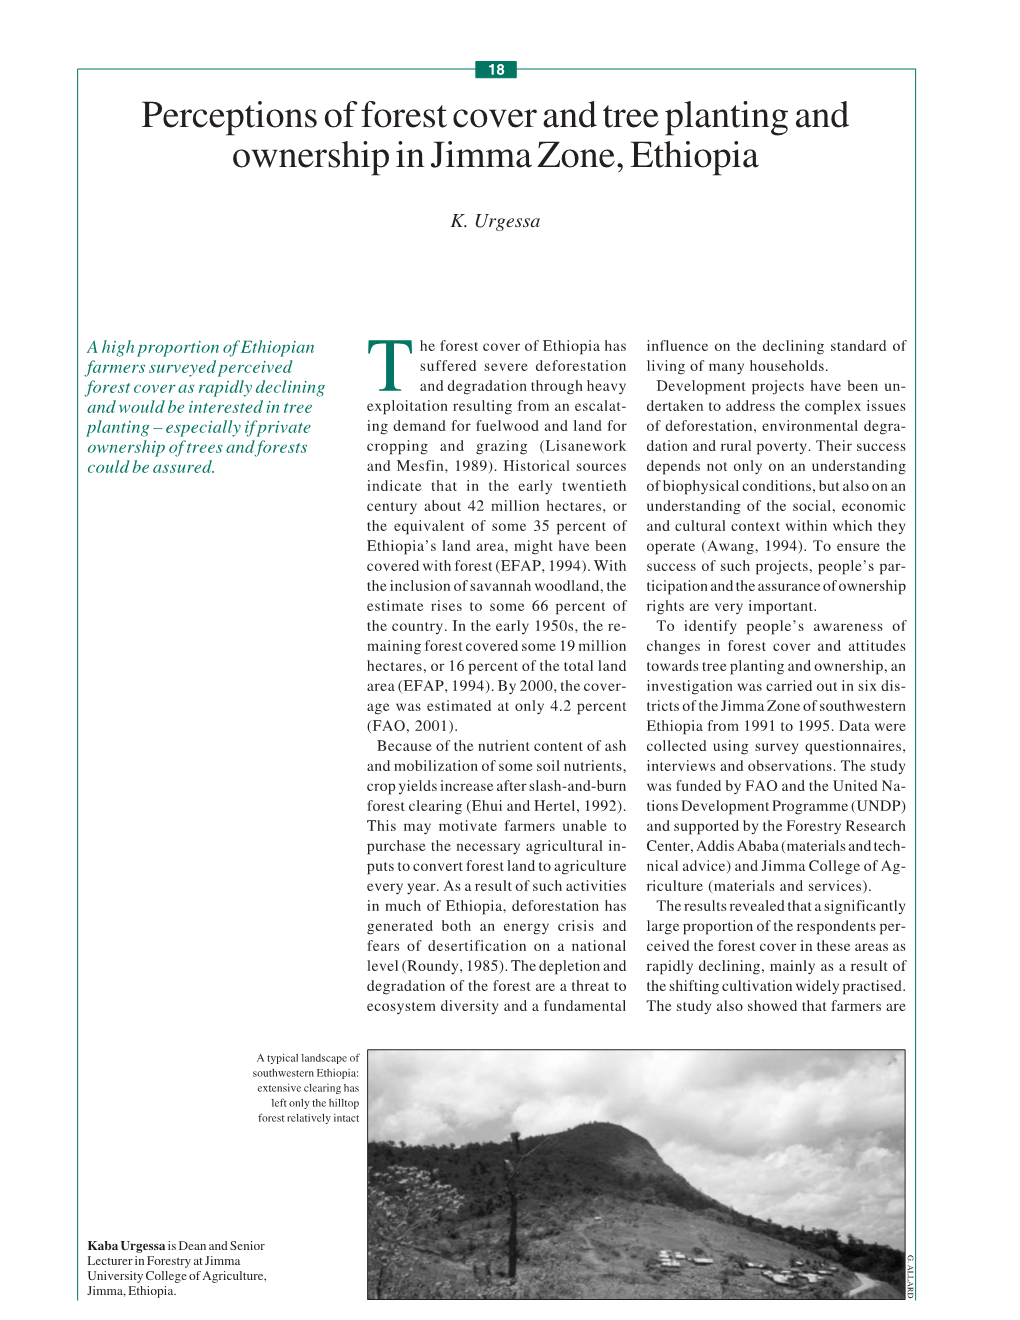 Perceptions of Forest Cover and Tree Planting and Ownership in Jimma Zone, Ethiopia